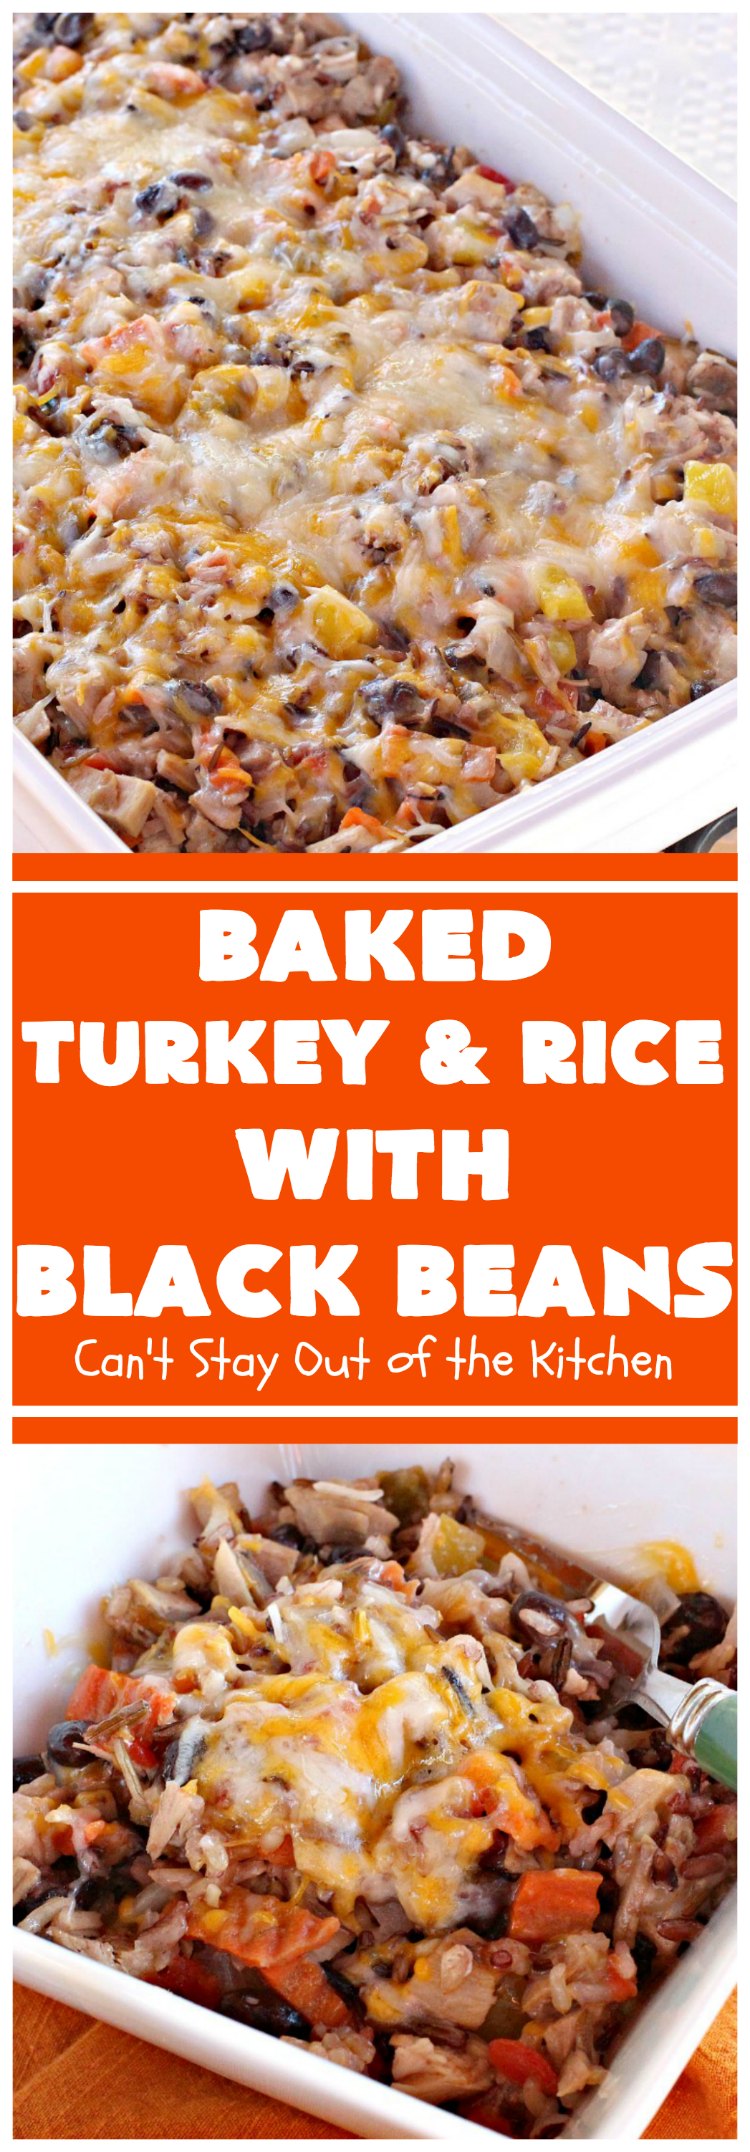 Baked Turkey and Rice with Black Beans | Can't Stay Out of the Kitchen | this delicious #TexMex #casserole is the perfect way to use up leftover #Thanksgiving #turkey!  #glutenfree #rice #cheese #blackbeans